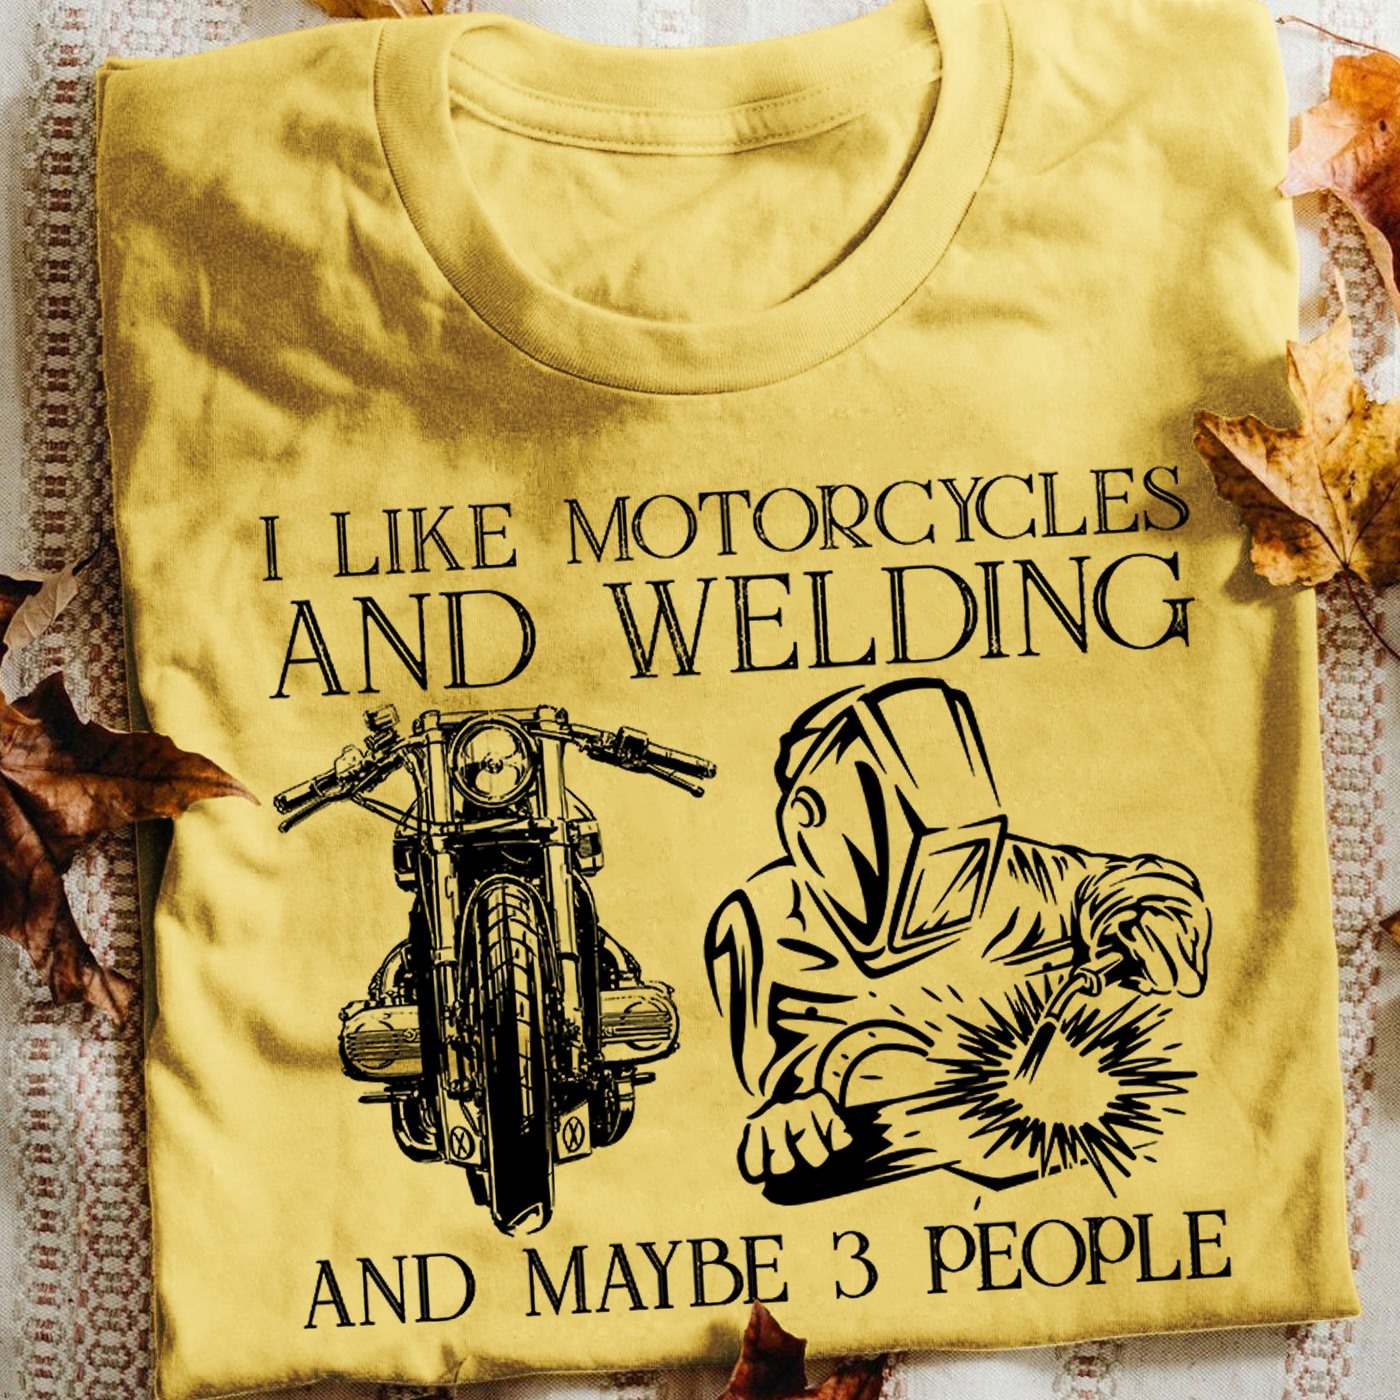 I like motorcycles and welding and maybe 3 people - Welder the job